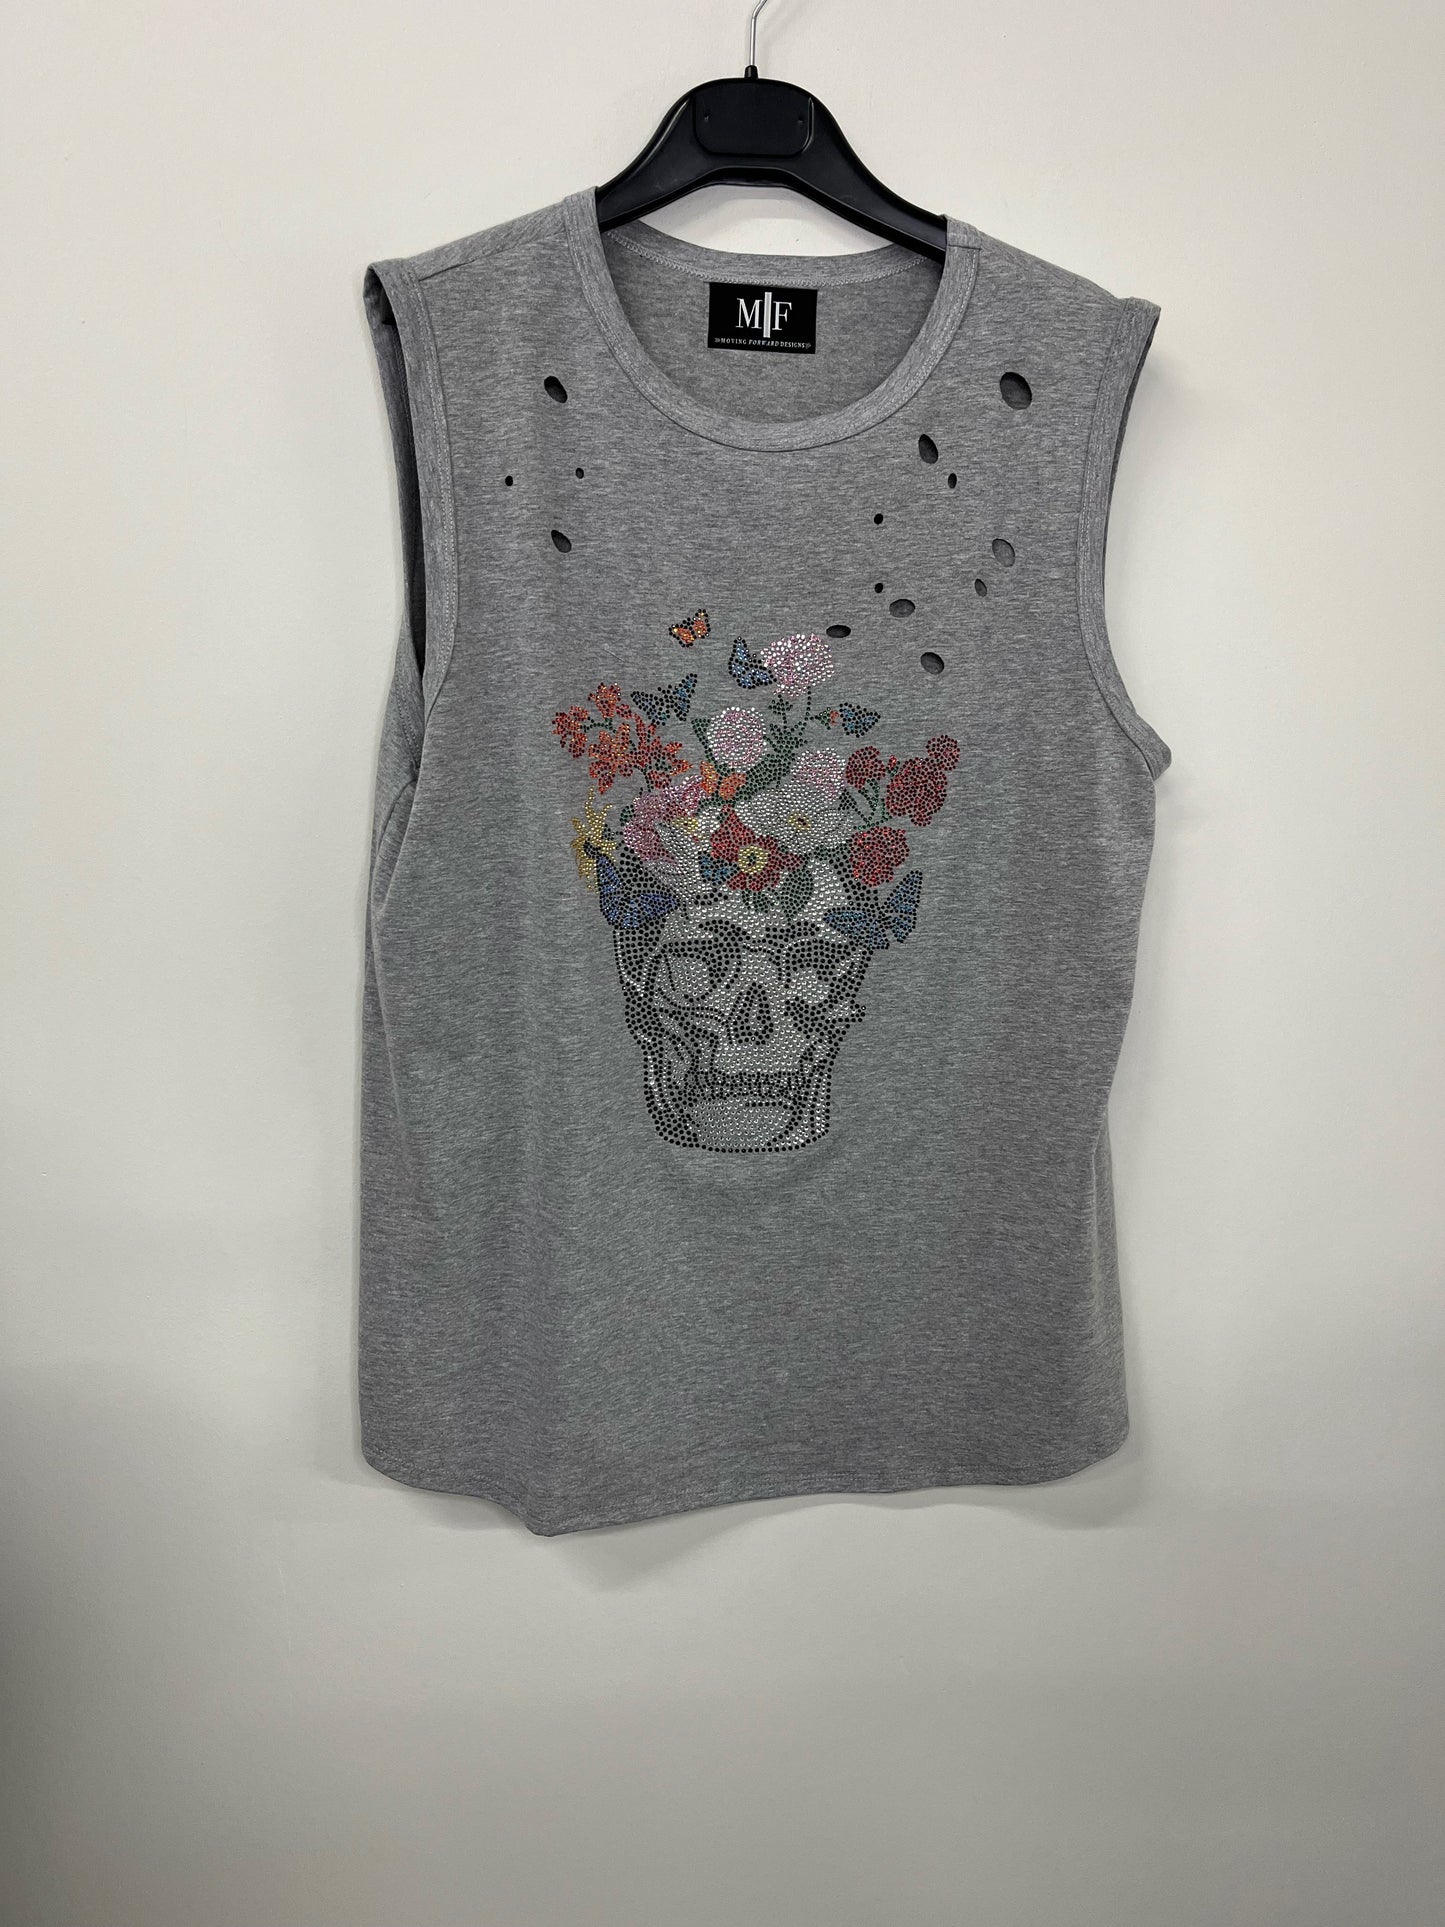 Tank, Muscle Distressed Gray, Skull Flowers